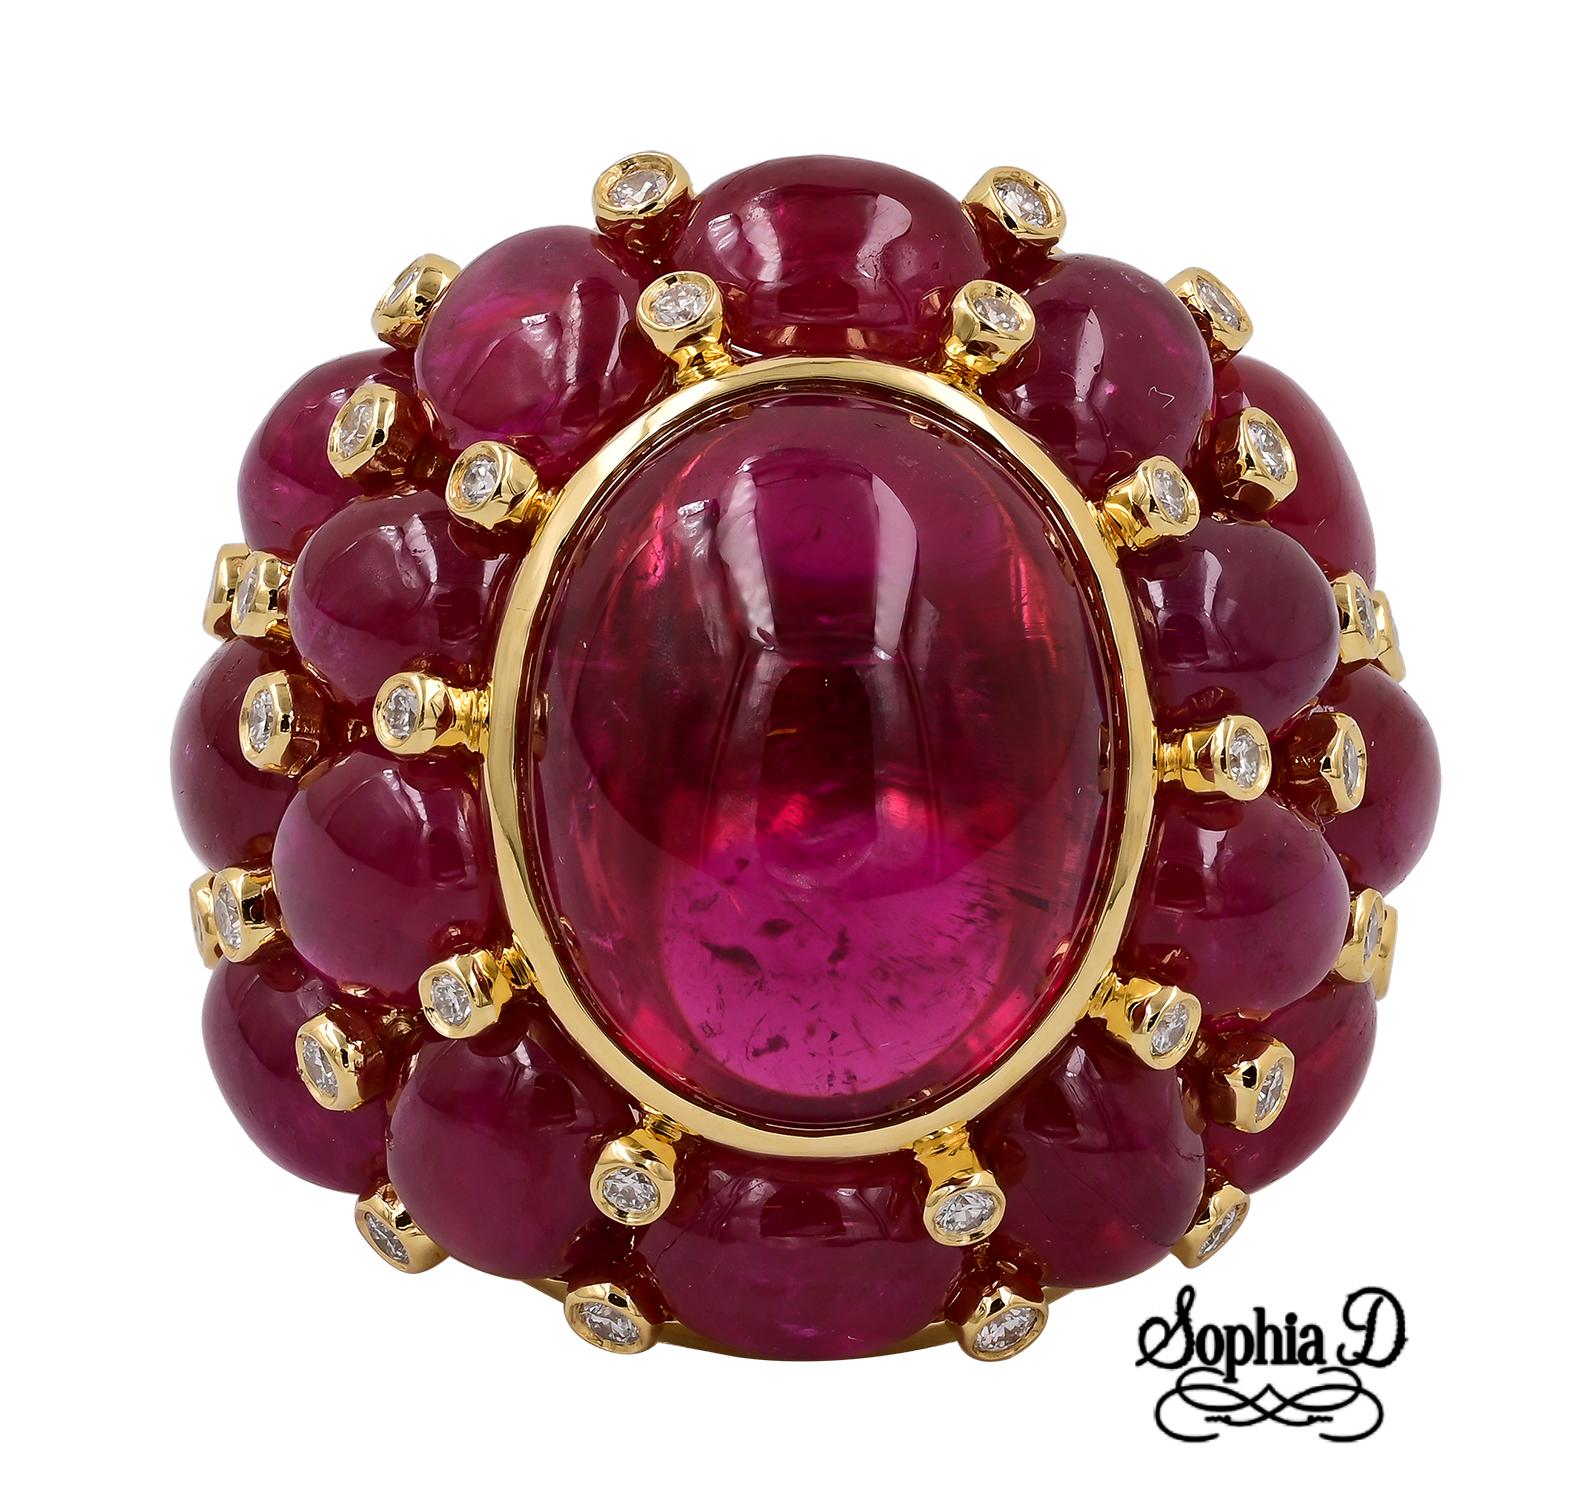 Sophia D. cocktail ring set in 18K yellow gold that features a 25.06 carat ruby, 13.62 carat tourmaline and 0.41 carat diamond. 

Sophia D by Joseph Dardashti LTD has been known worldwide for 35 years and are inspired by classic Art Deco design that